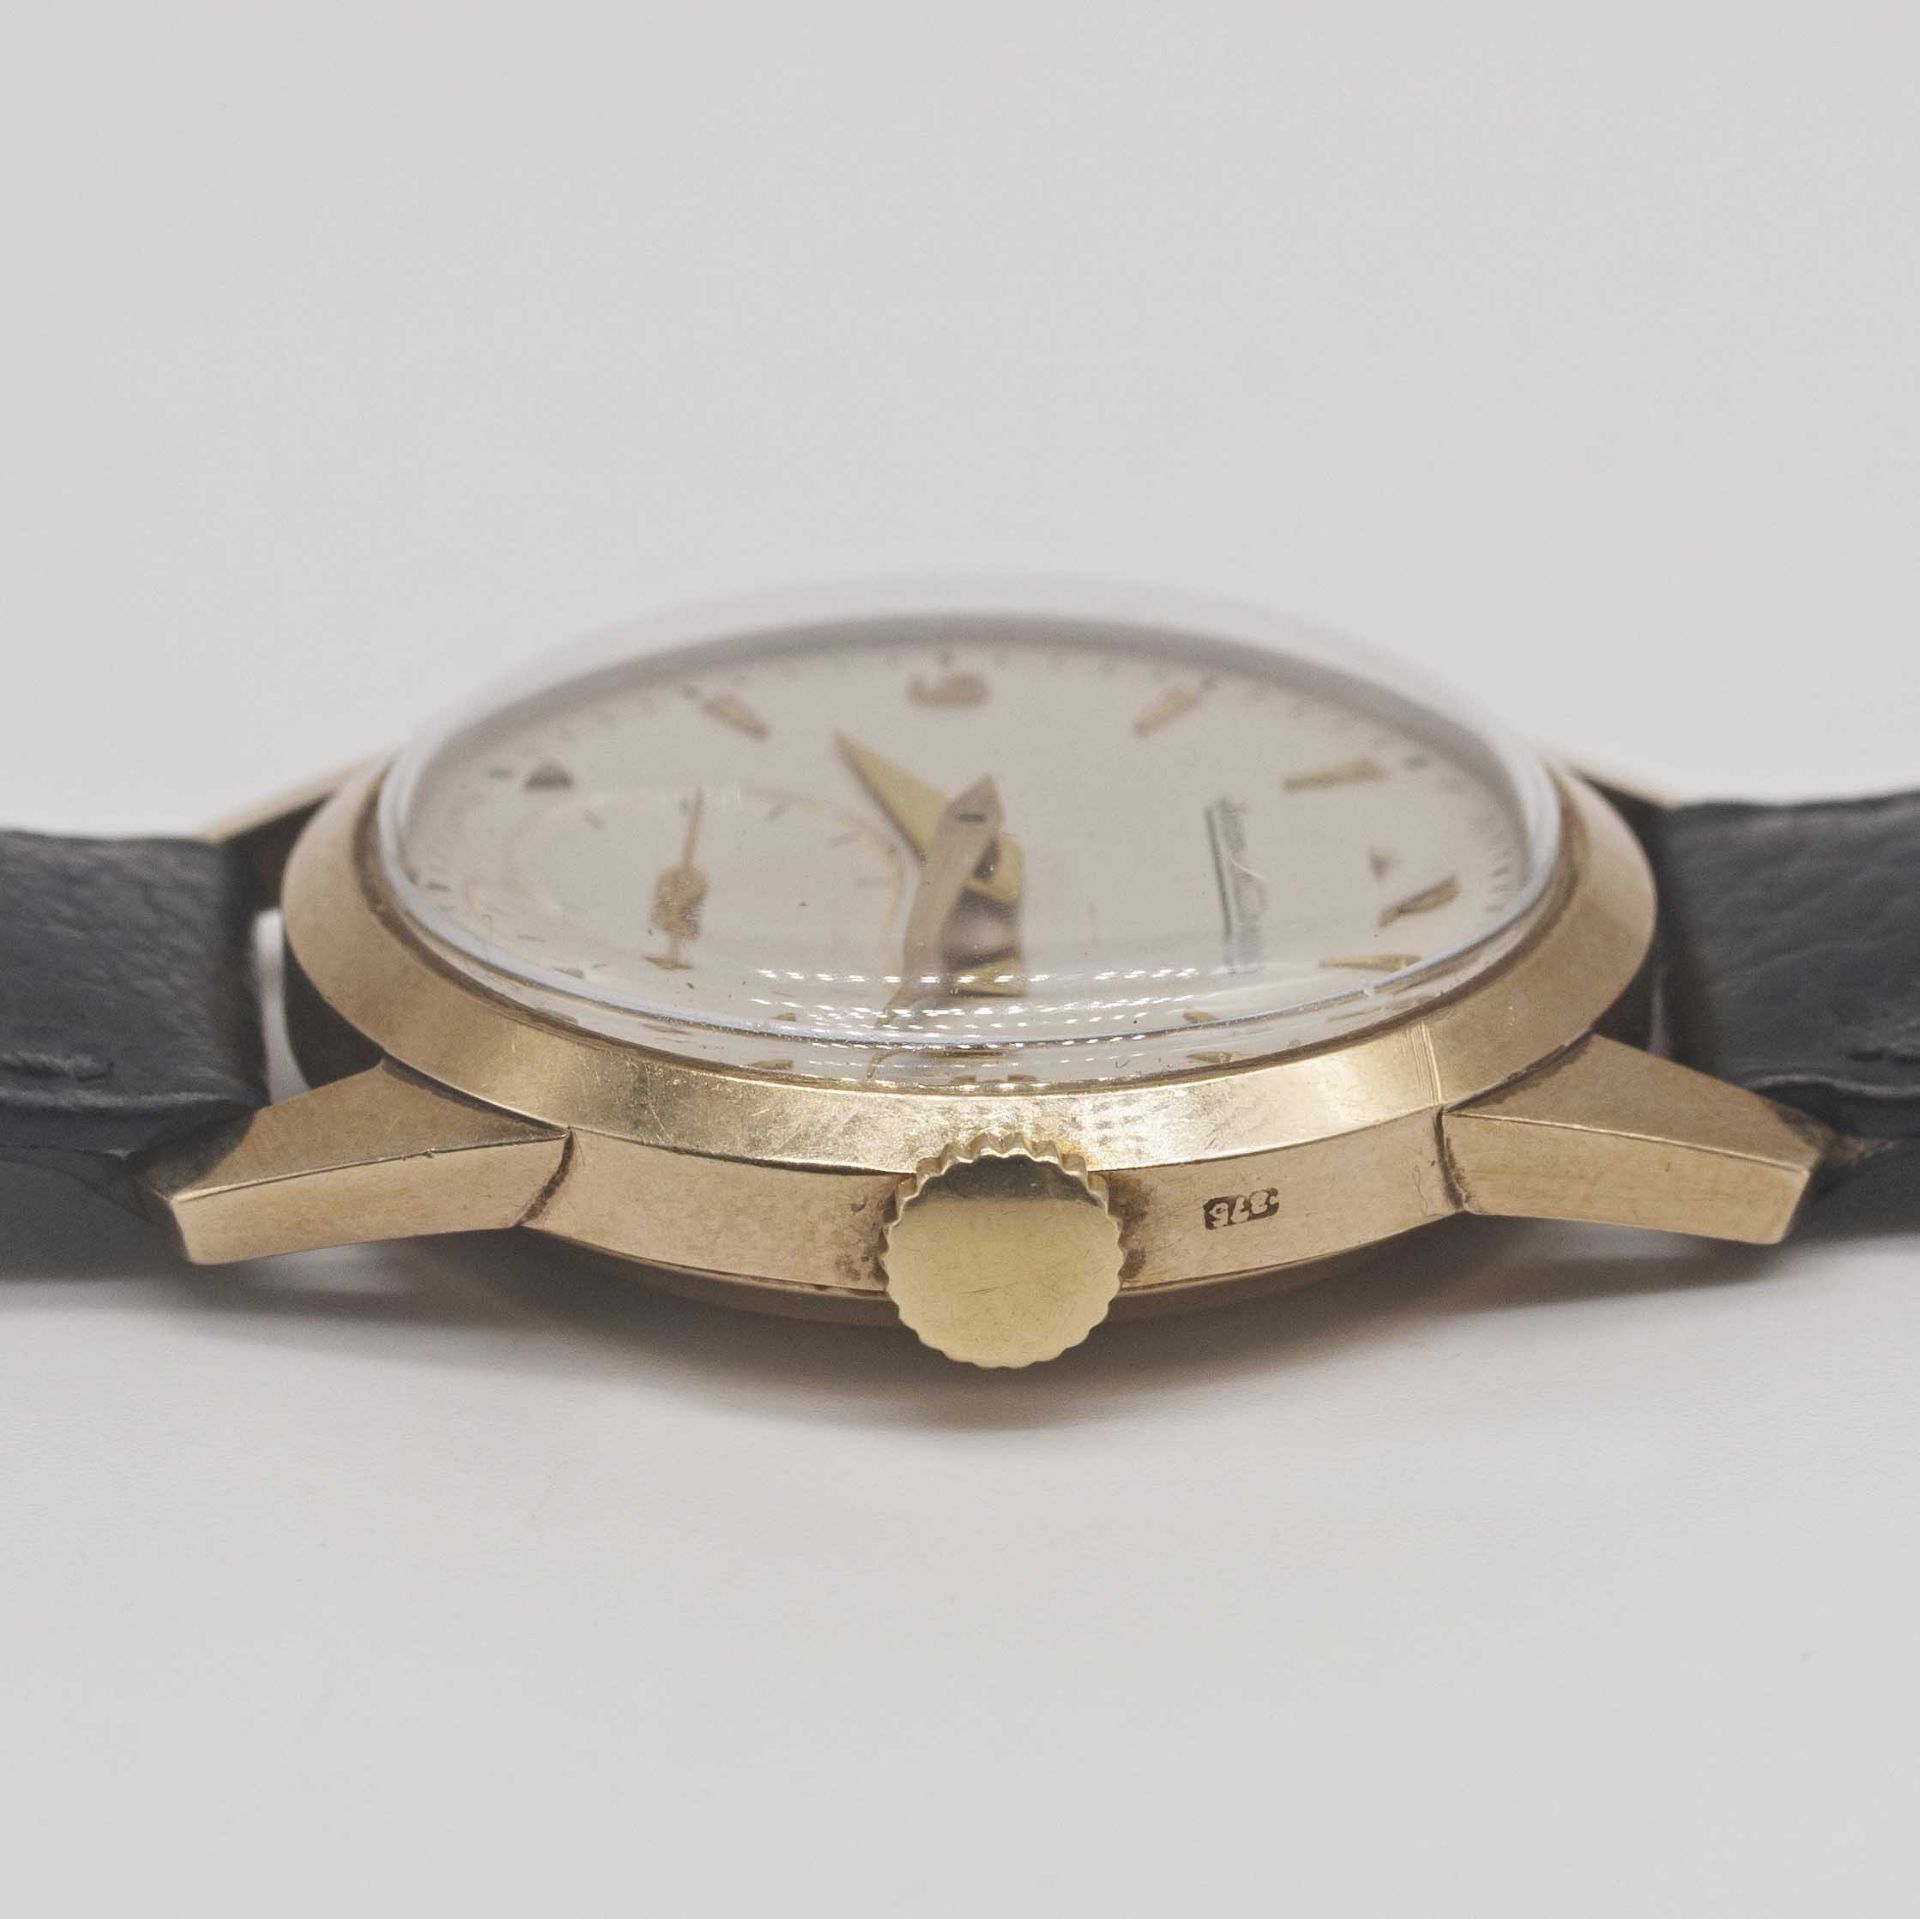 A GENTLEMAN'S 9CT SOLID GOLD JAEGER LECOULTRE WRIST WATCH CIRCA 1960s Movement: Manual wind, cal. - Image 6 of 7